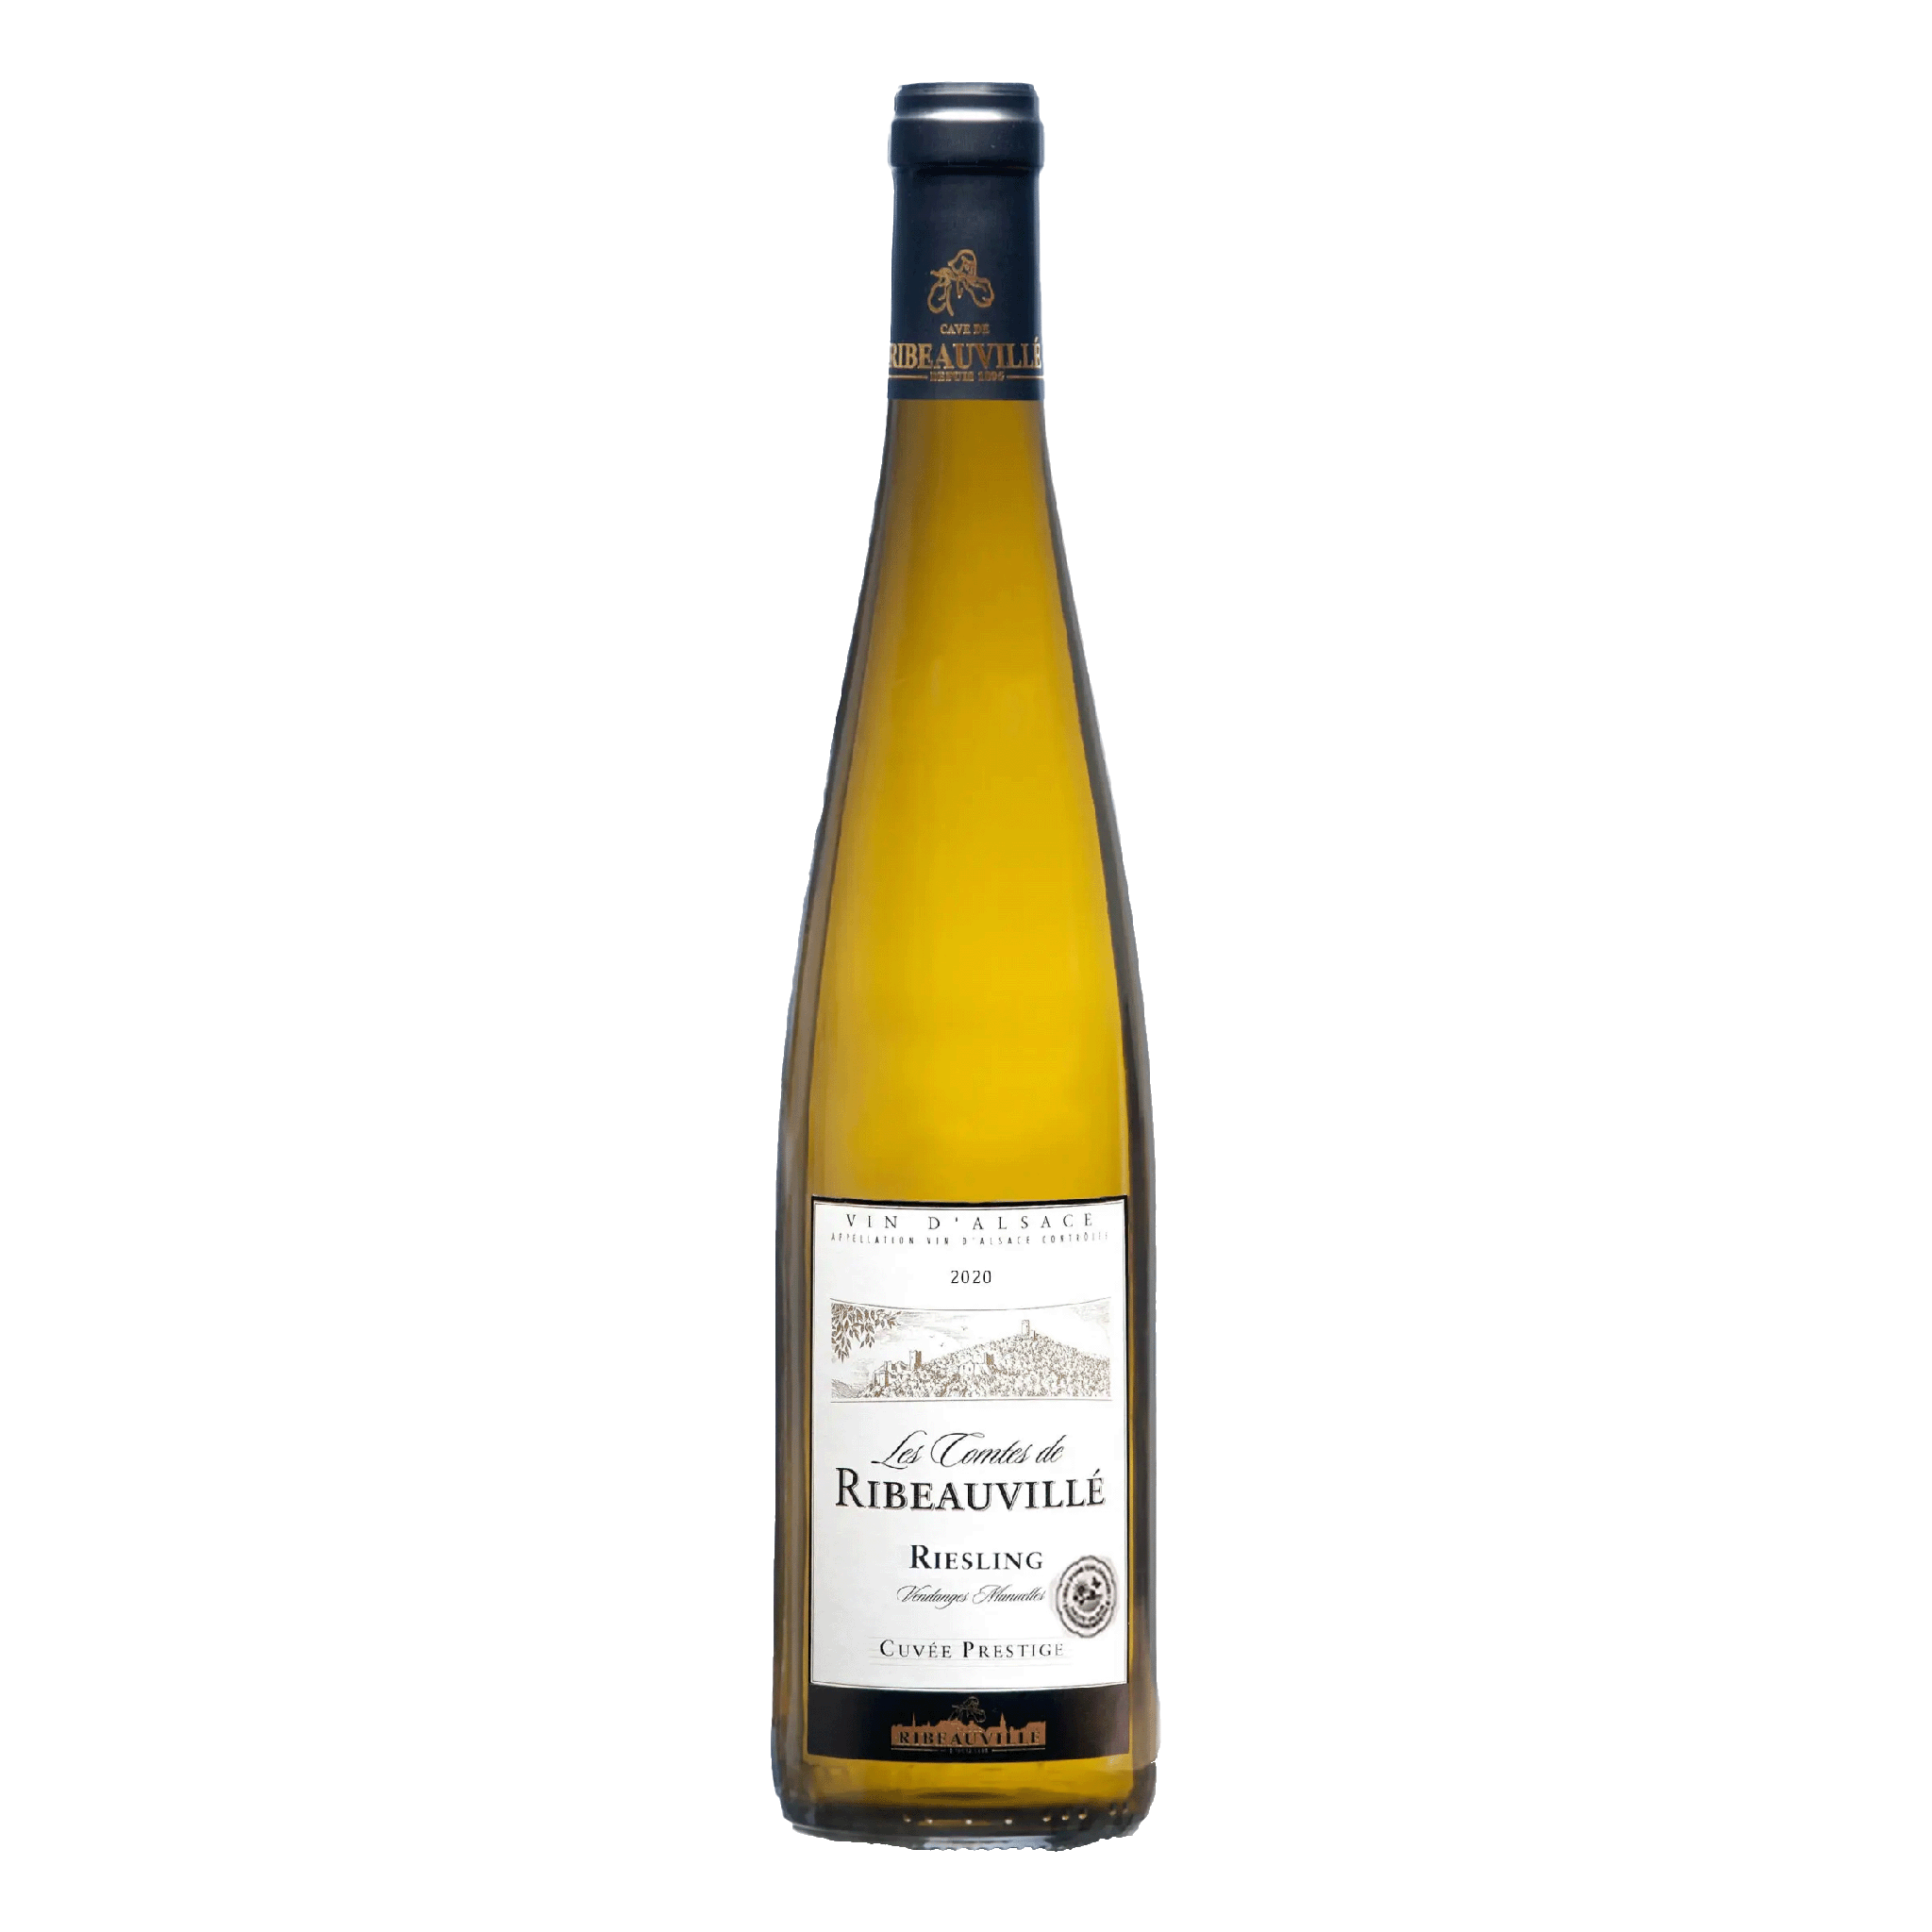 Comtes de Ribeauville Riesling